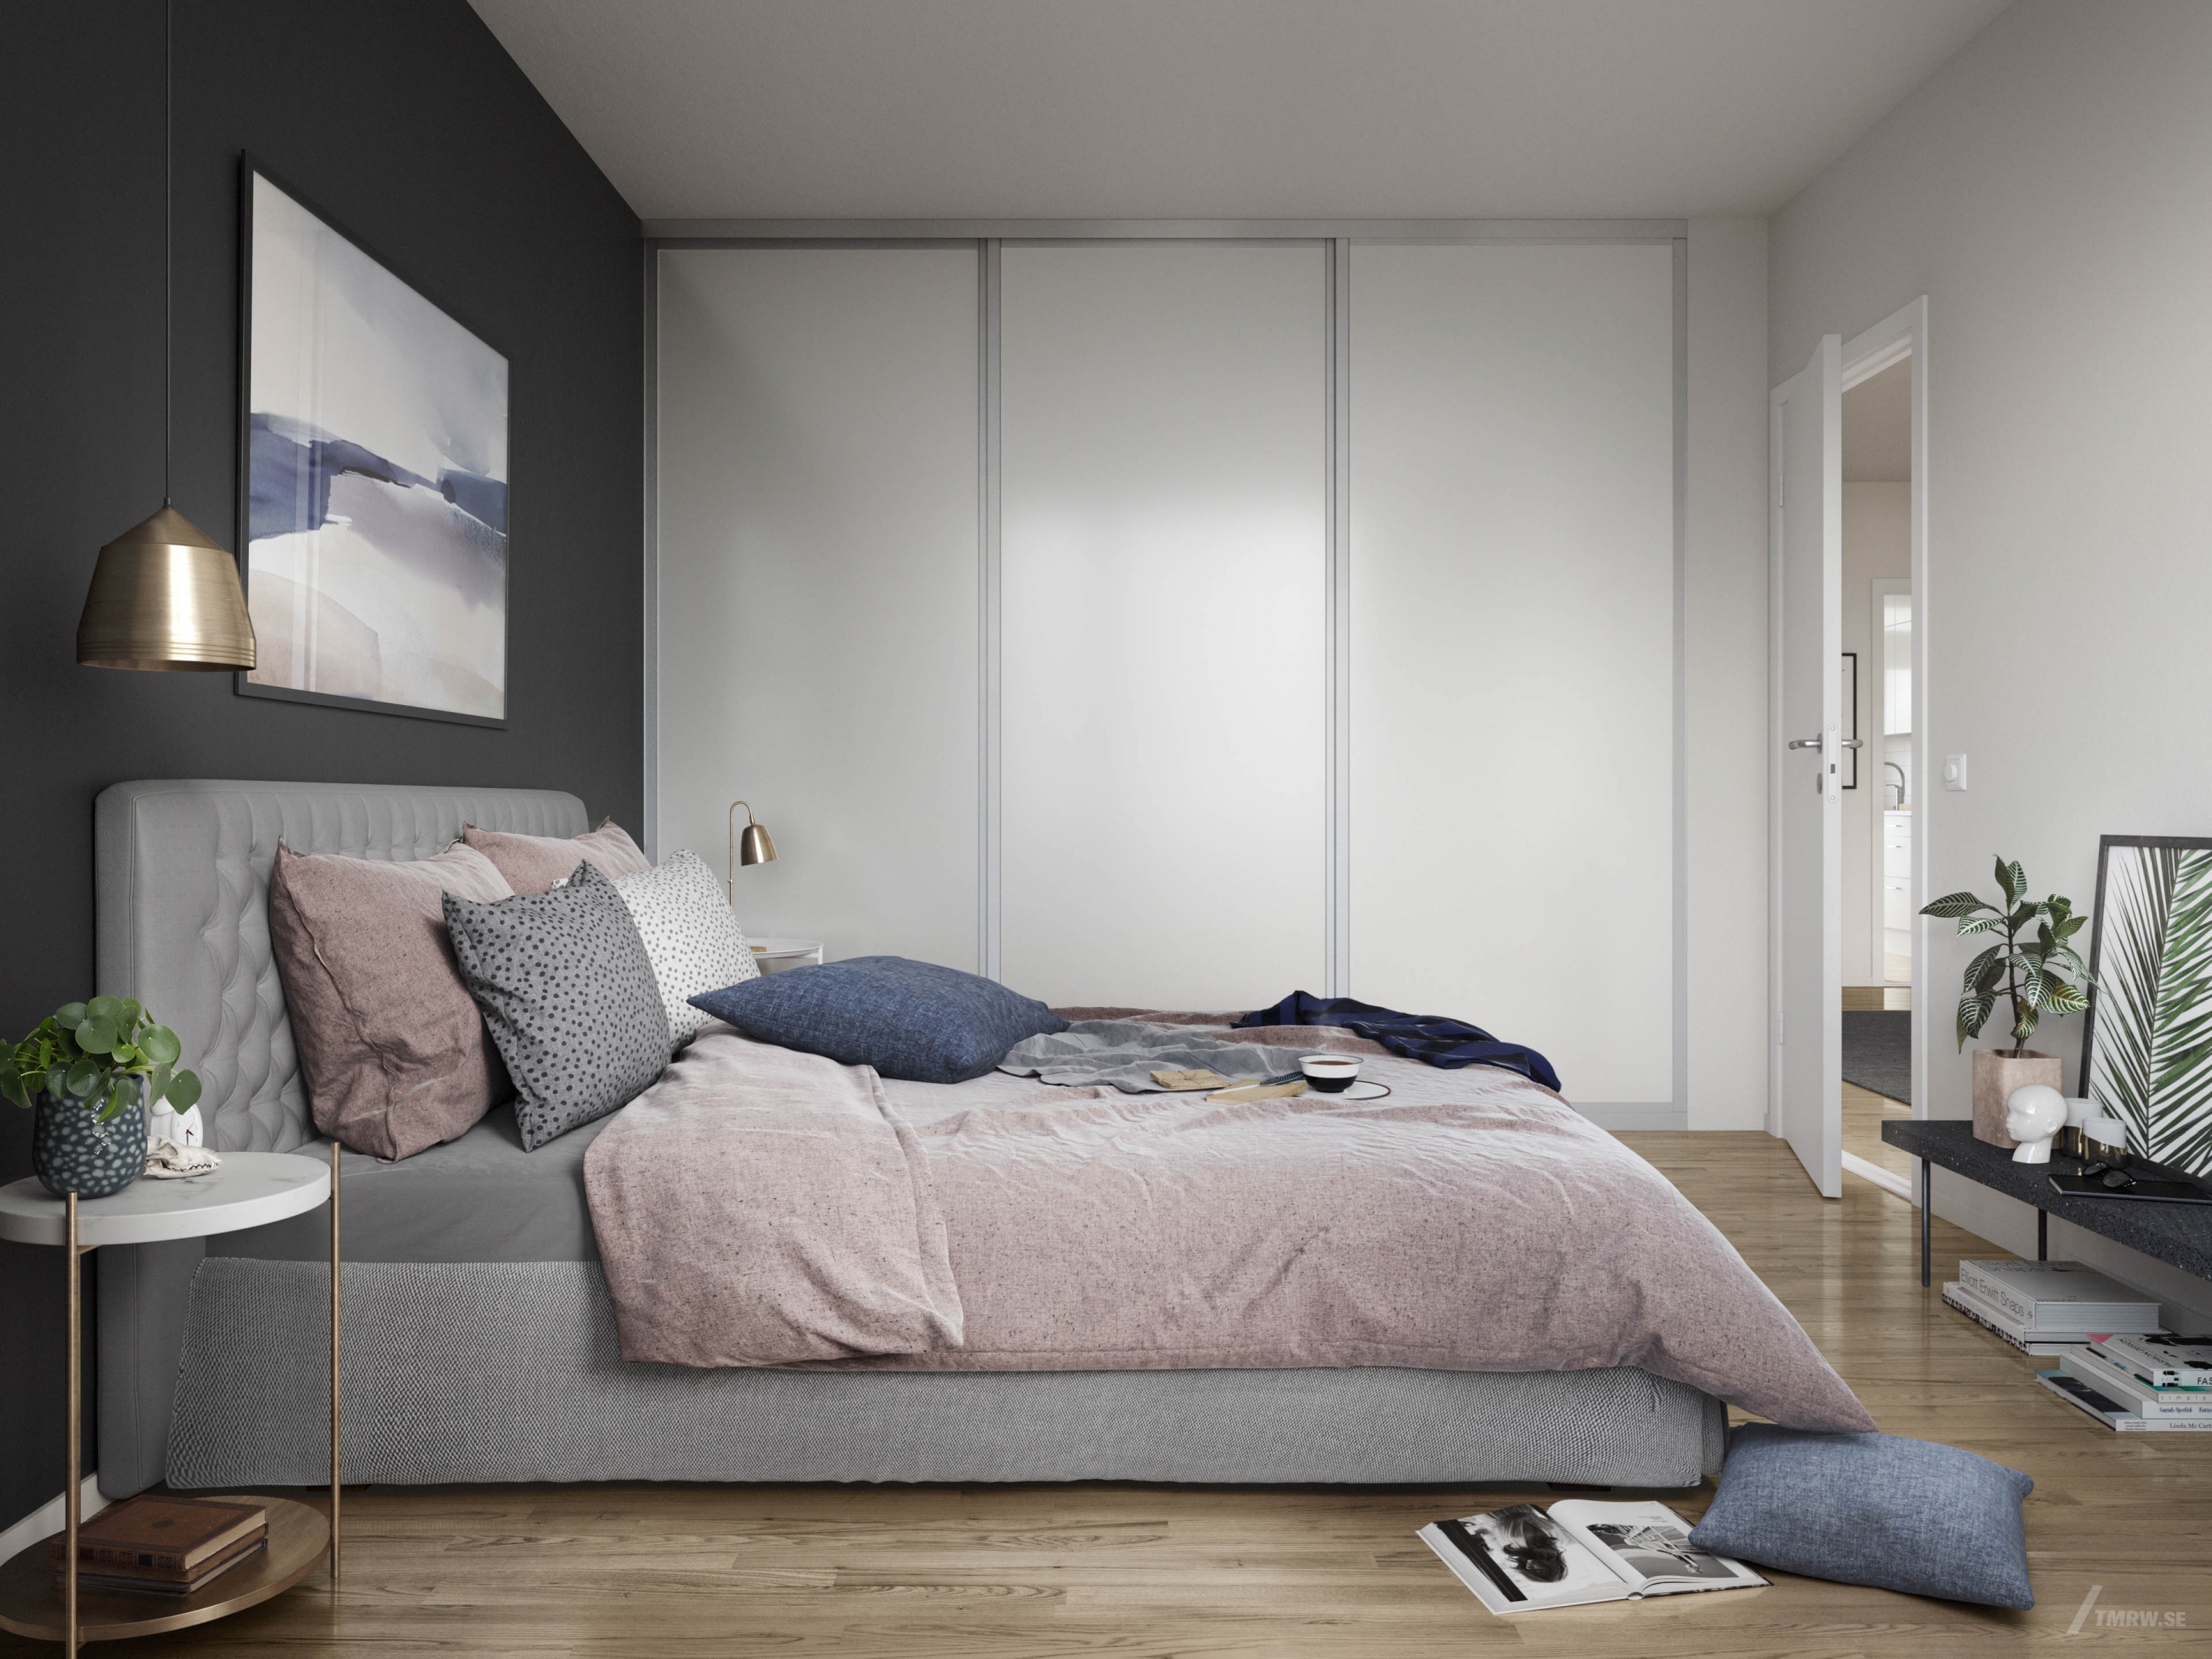 Architectural visualization of Esplanaden for HSB a apartment bed room in day light form an interior view.